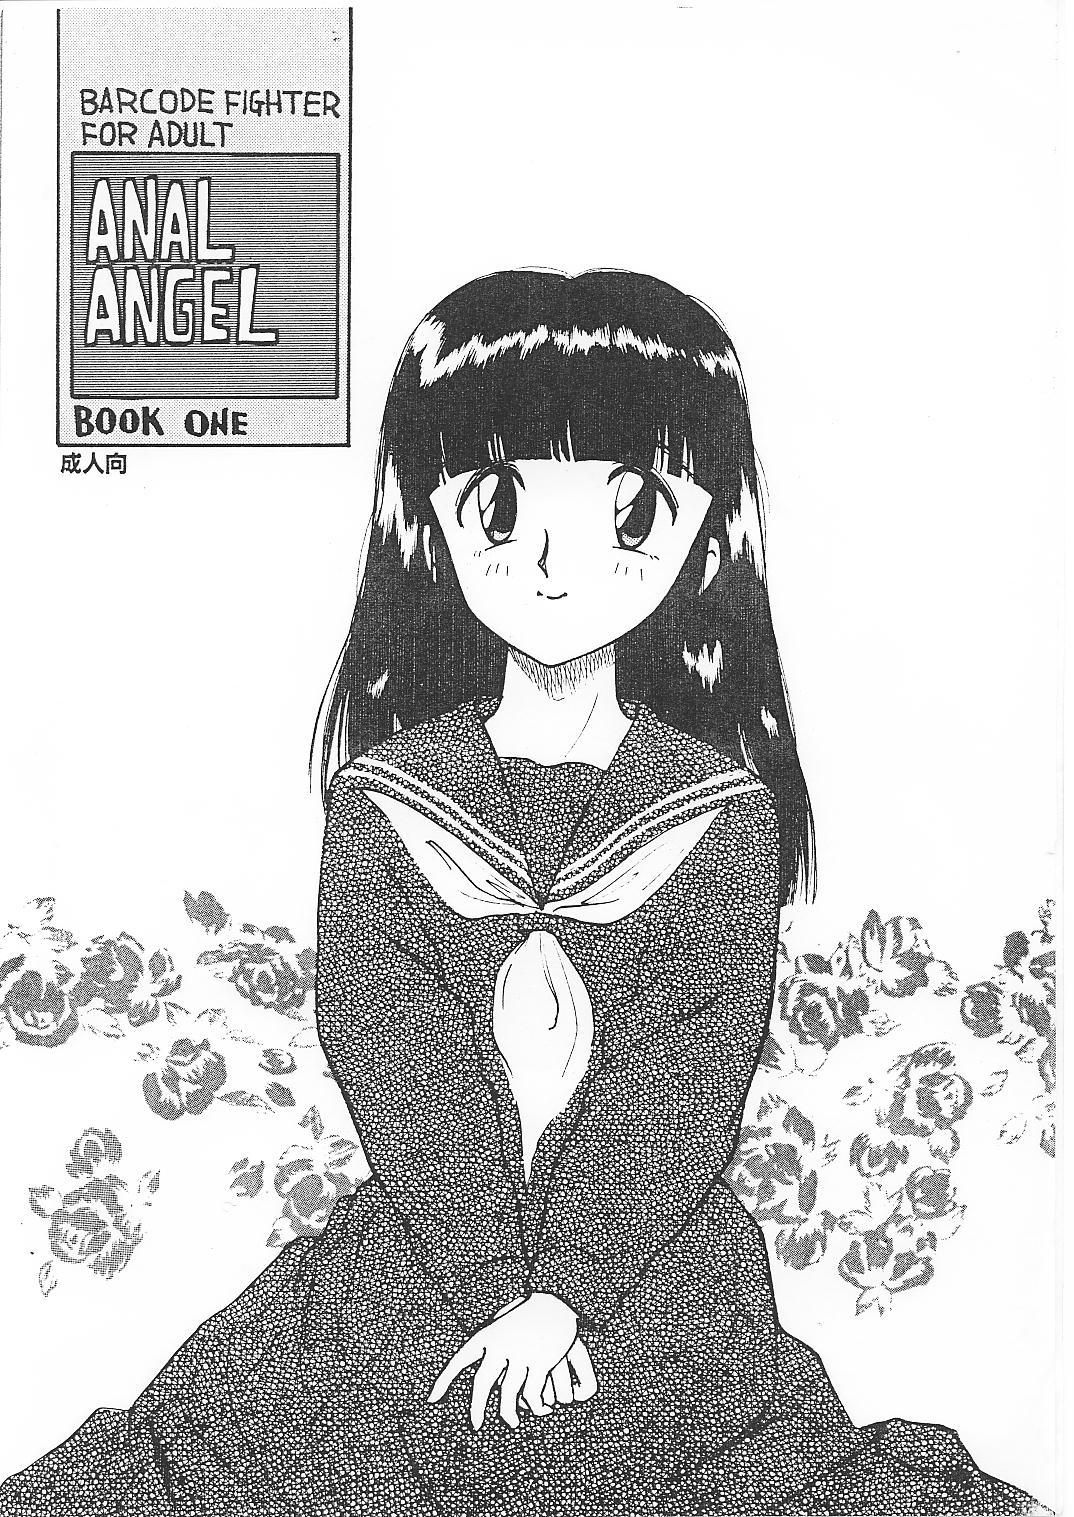 Costume ANAL ANGEL - Barcode fighter Cornudo - Page 1